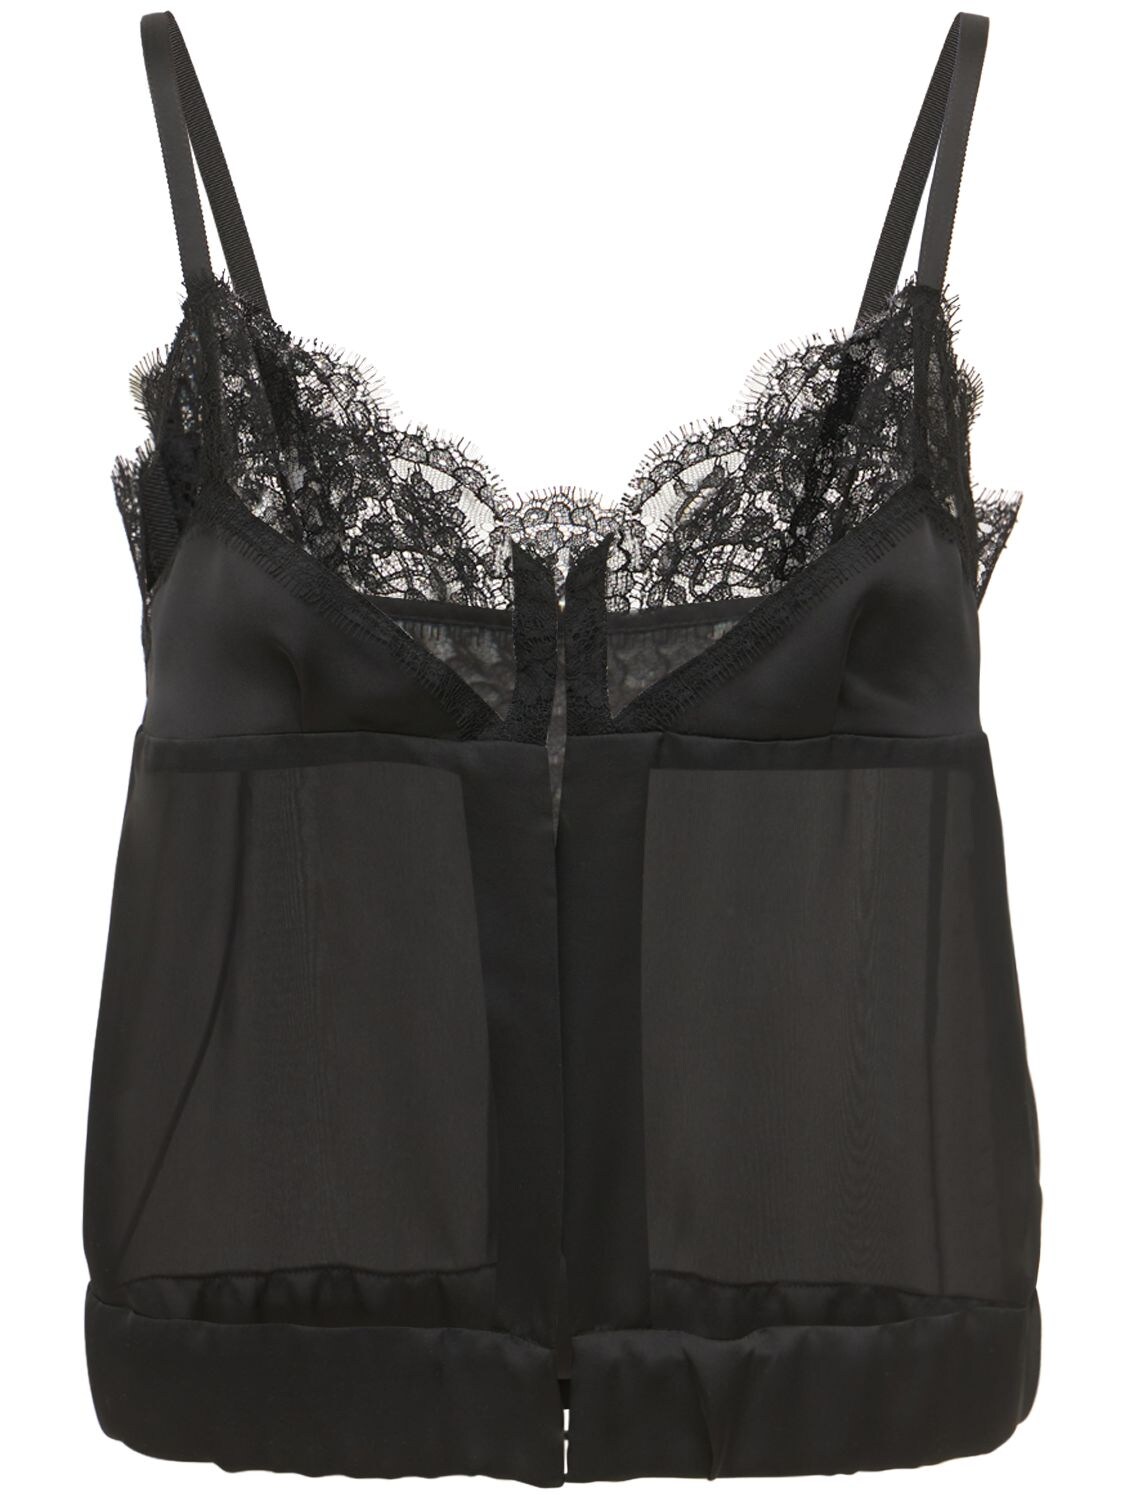 Satin & Lace Camisole Top